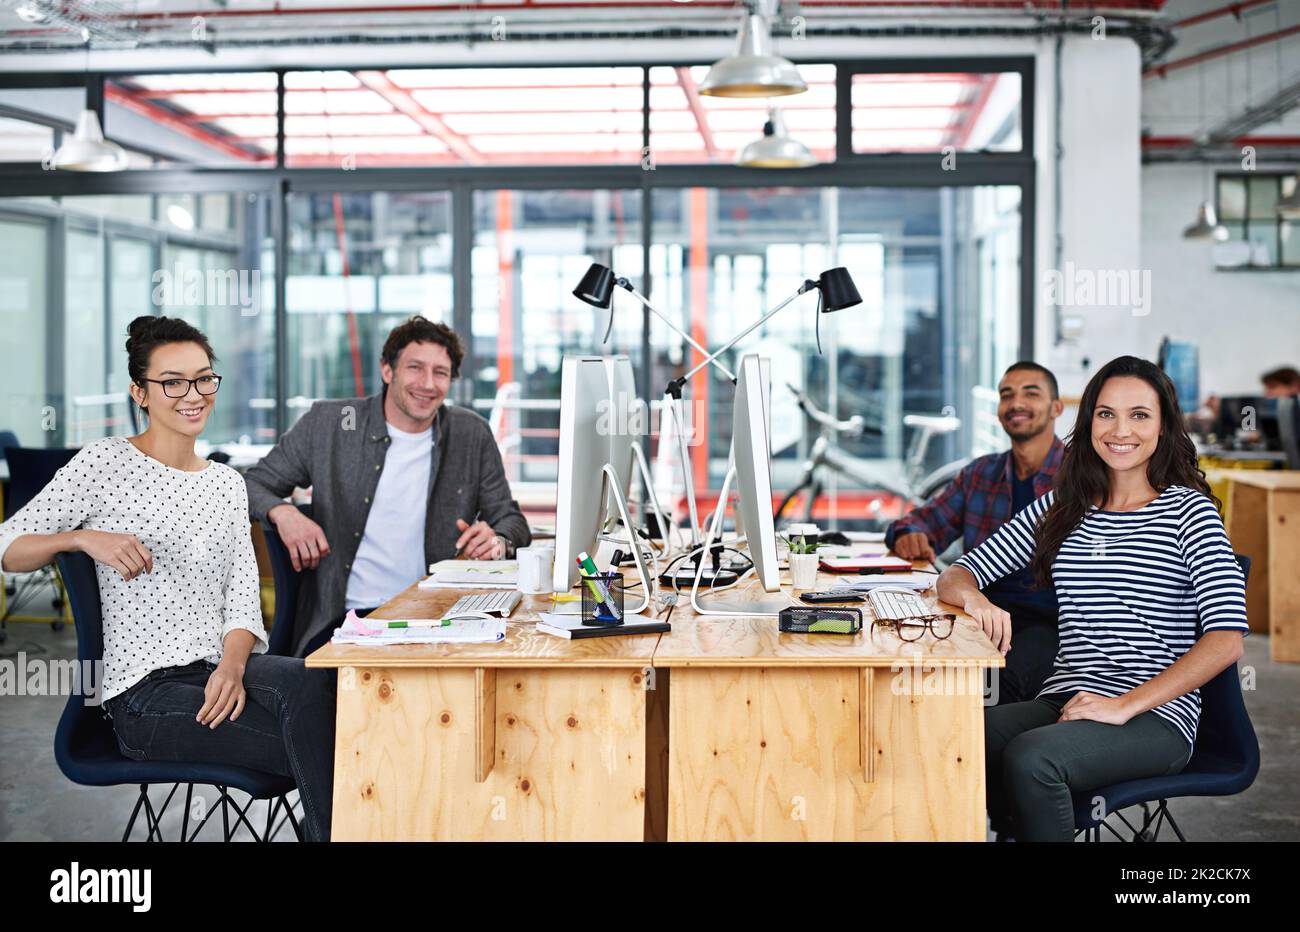 Make creativity a job. Portrait of a group of young office workers sitting at their work stations. Stock Photo